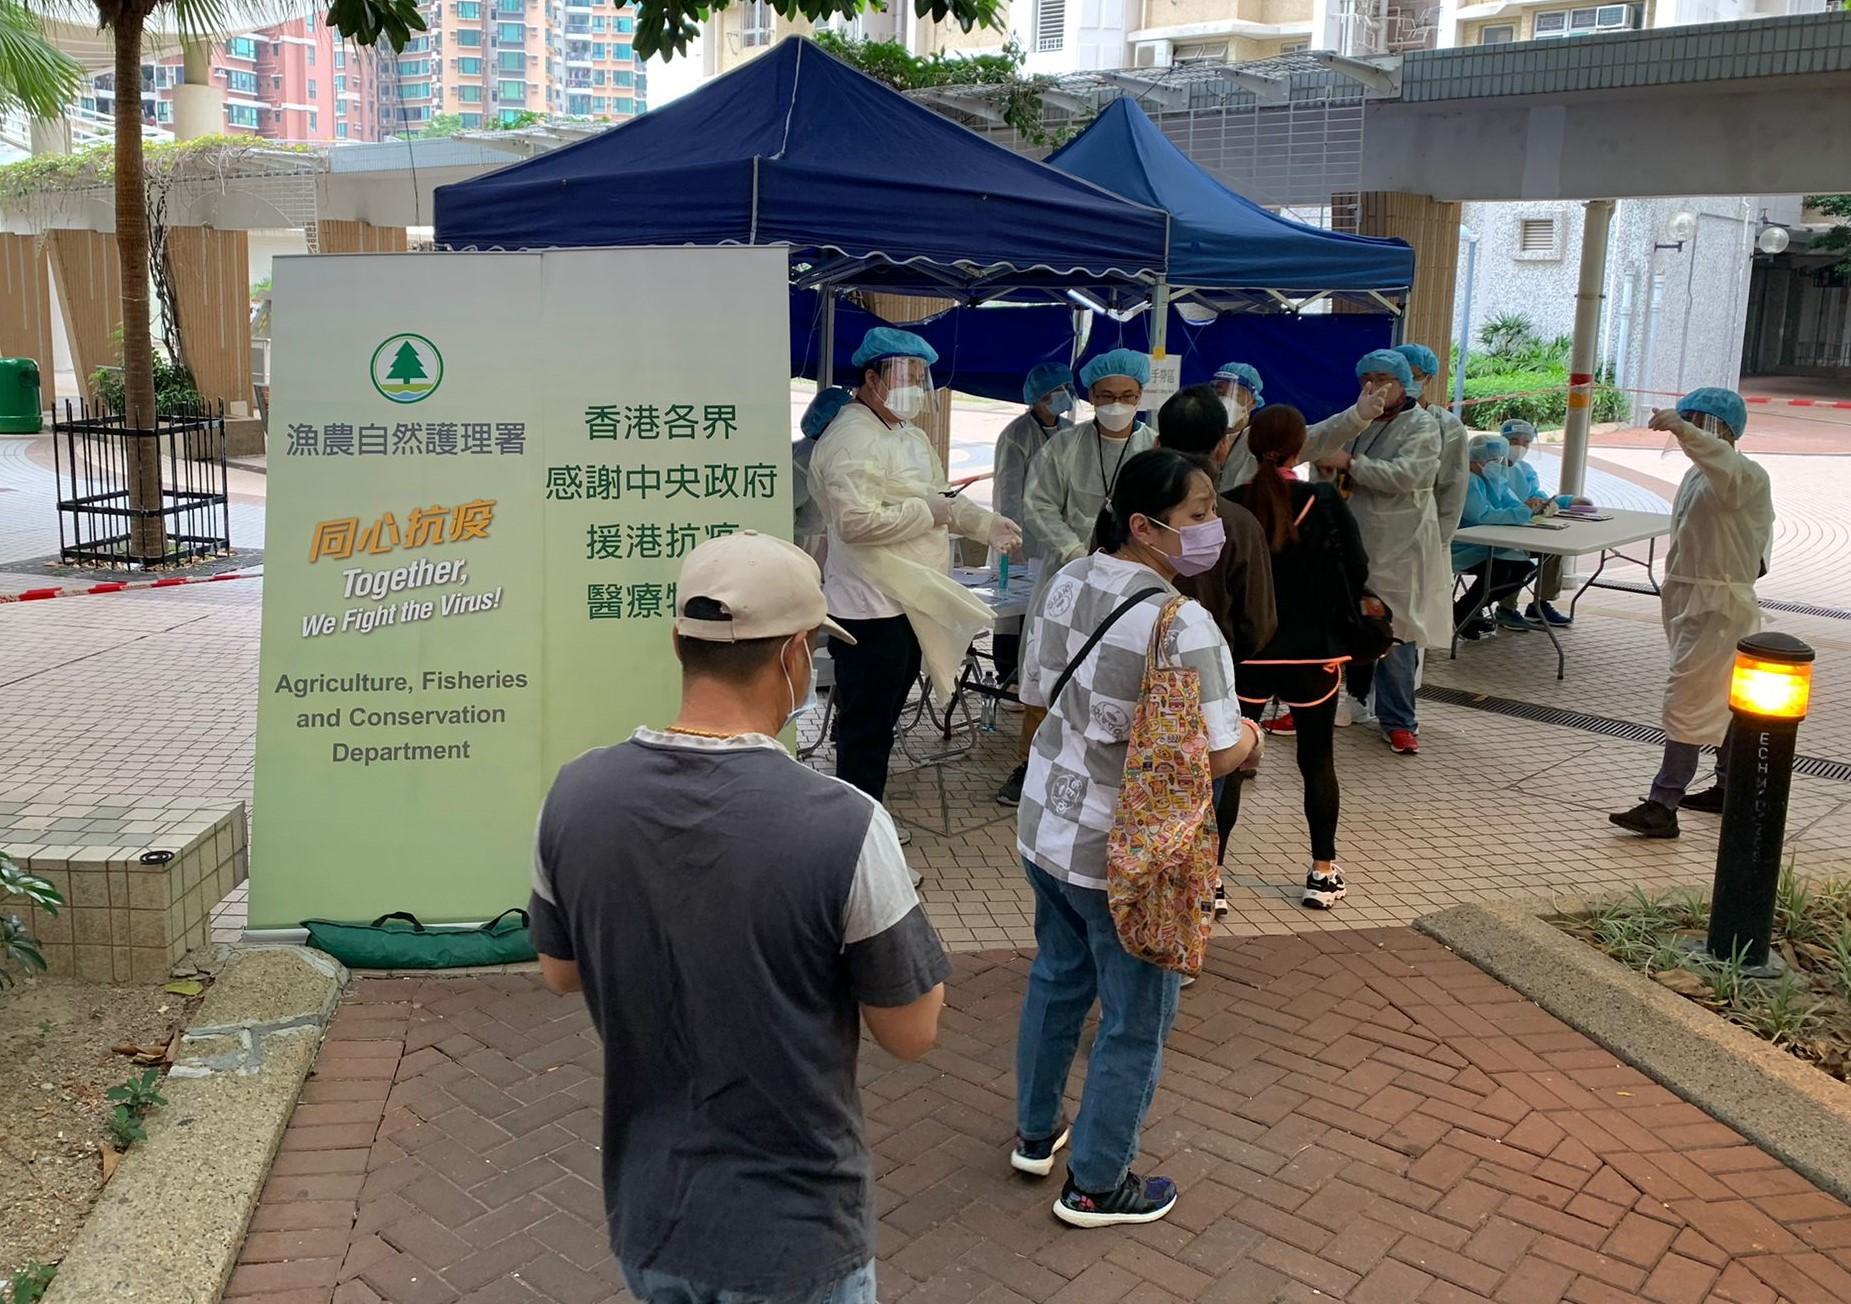 The Government yesterday (April 17) enforced "restriction-testing declaration" and compulsory testing notice in respect of specified "restricted area" in Ching Yun House, Ching Ho Estate, Sheung Shui. Photo shows staff members of the Agriculture, Fisheries and Conservation Department removing the wristbands for persons who can leave the "restricted area".

